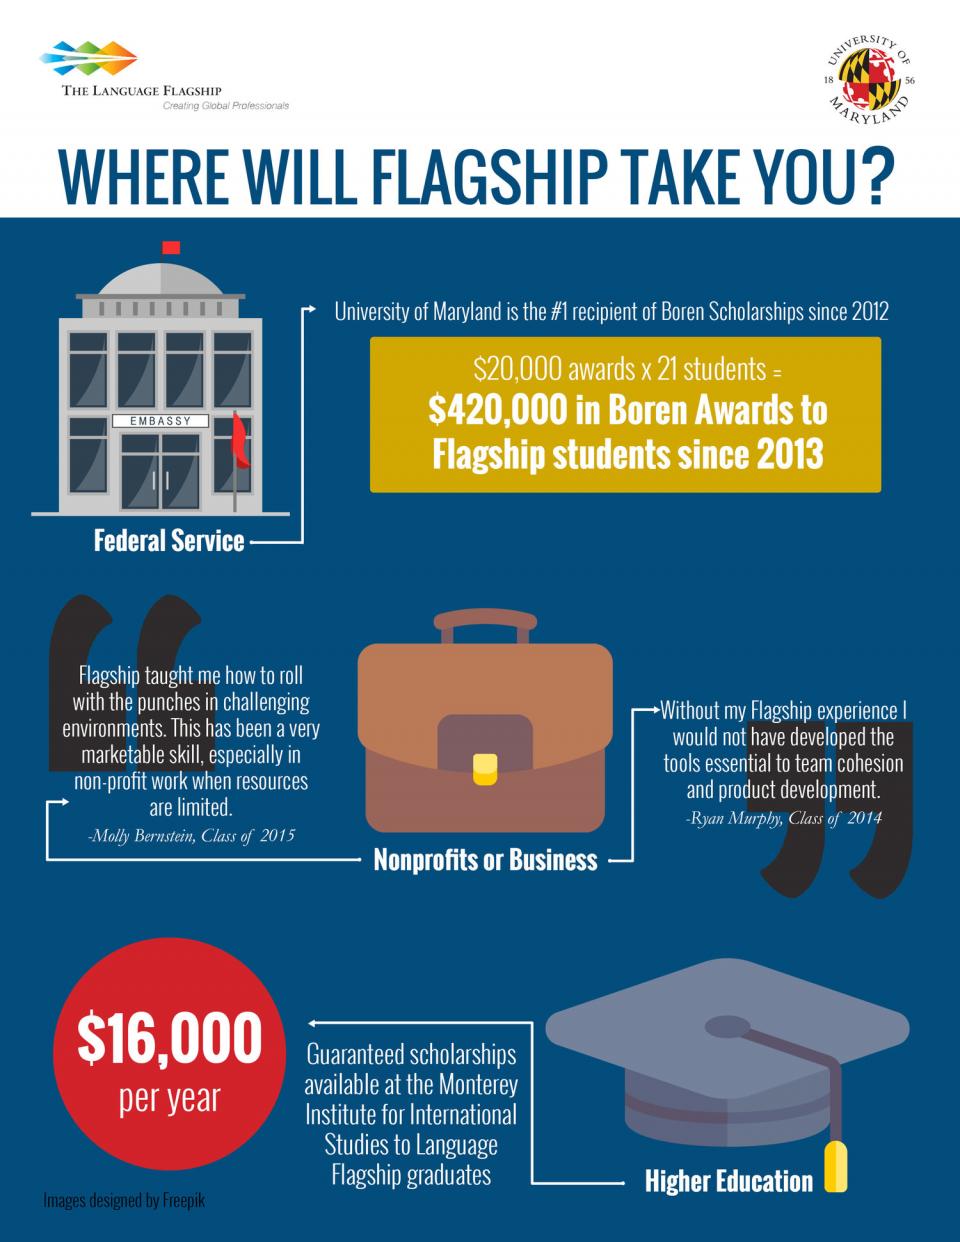 Infographic about career paths after flaship programs at UMD